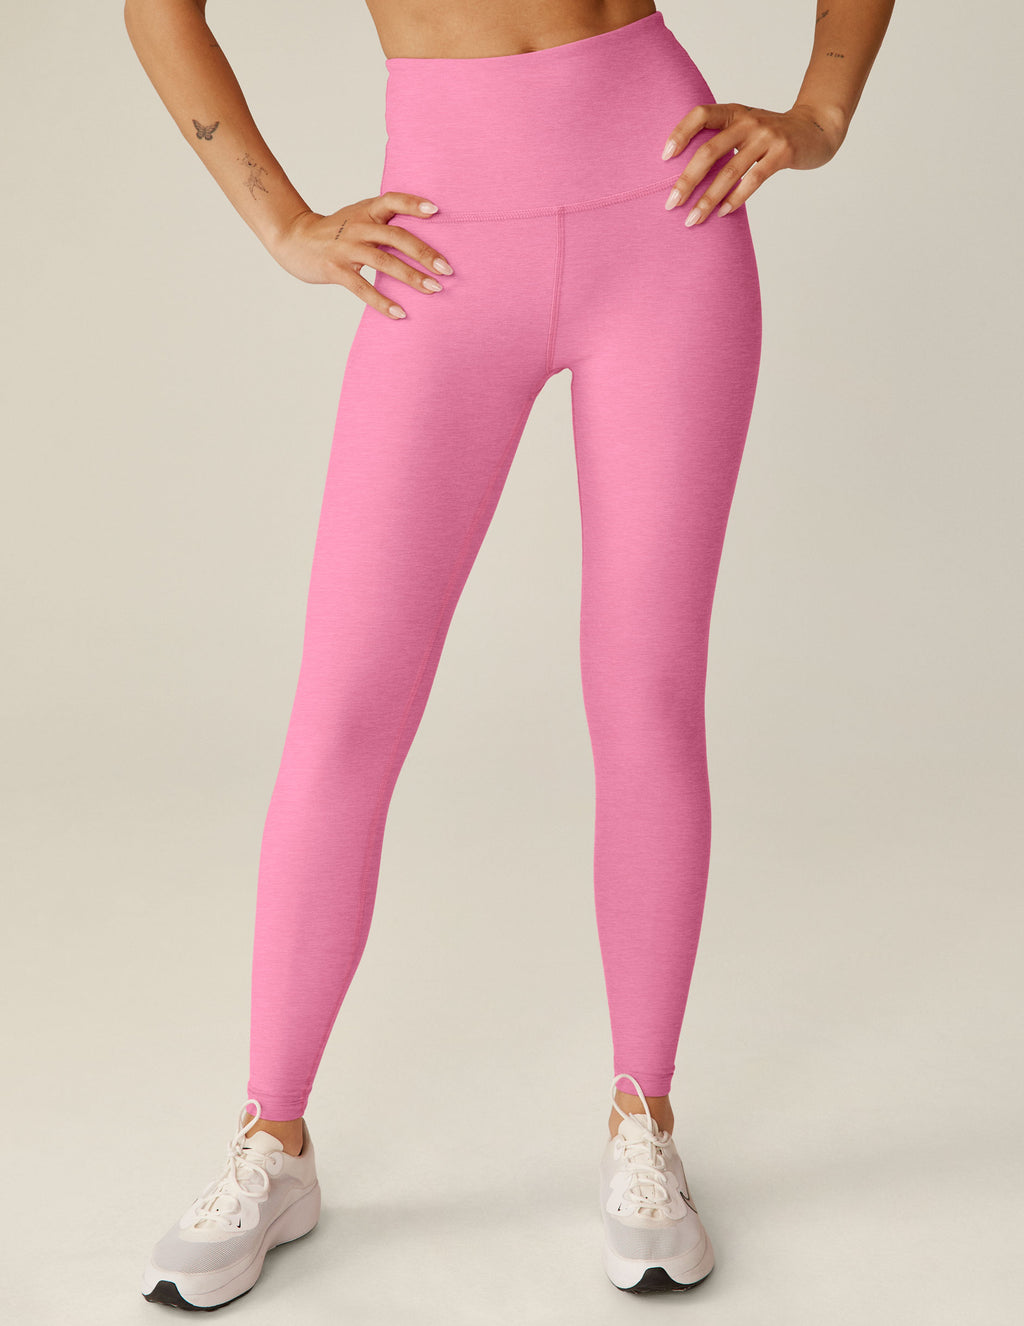 Bright Pink Soft Stretchable Cotton Stretch Legging Workout Yoga Full  Length